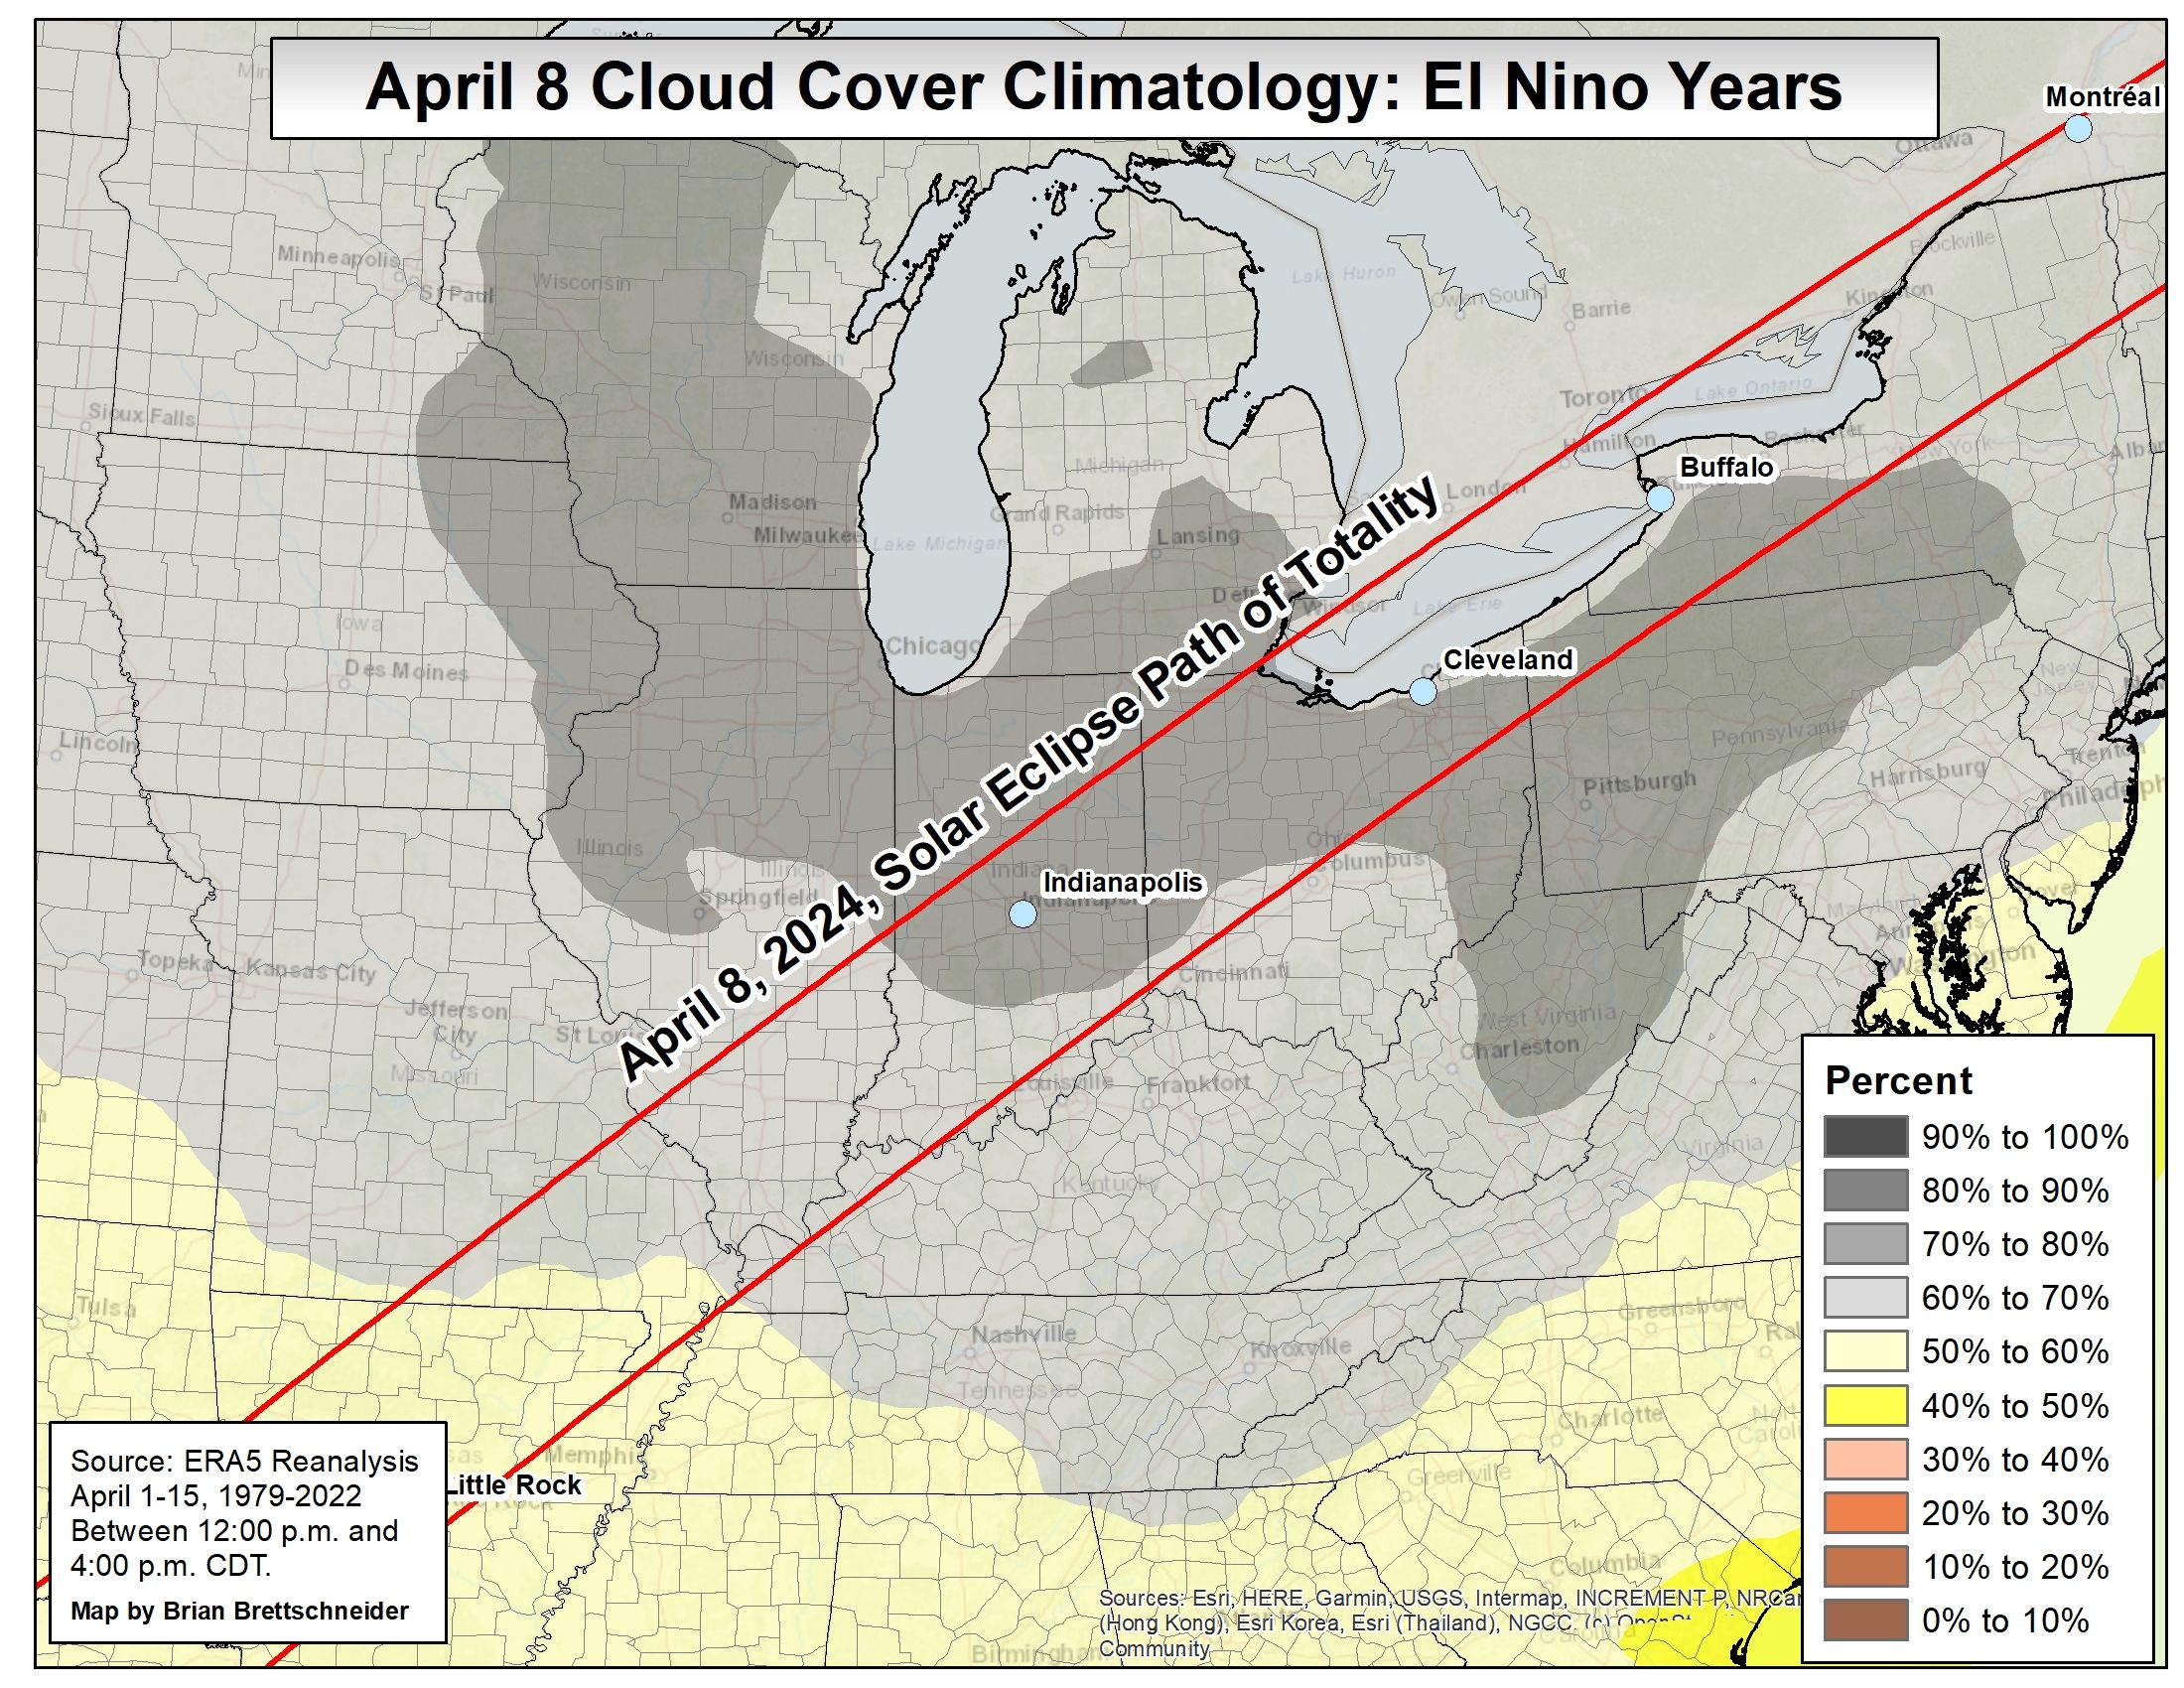 Cloud cover for el nino years